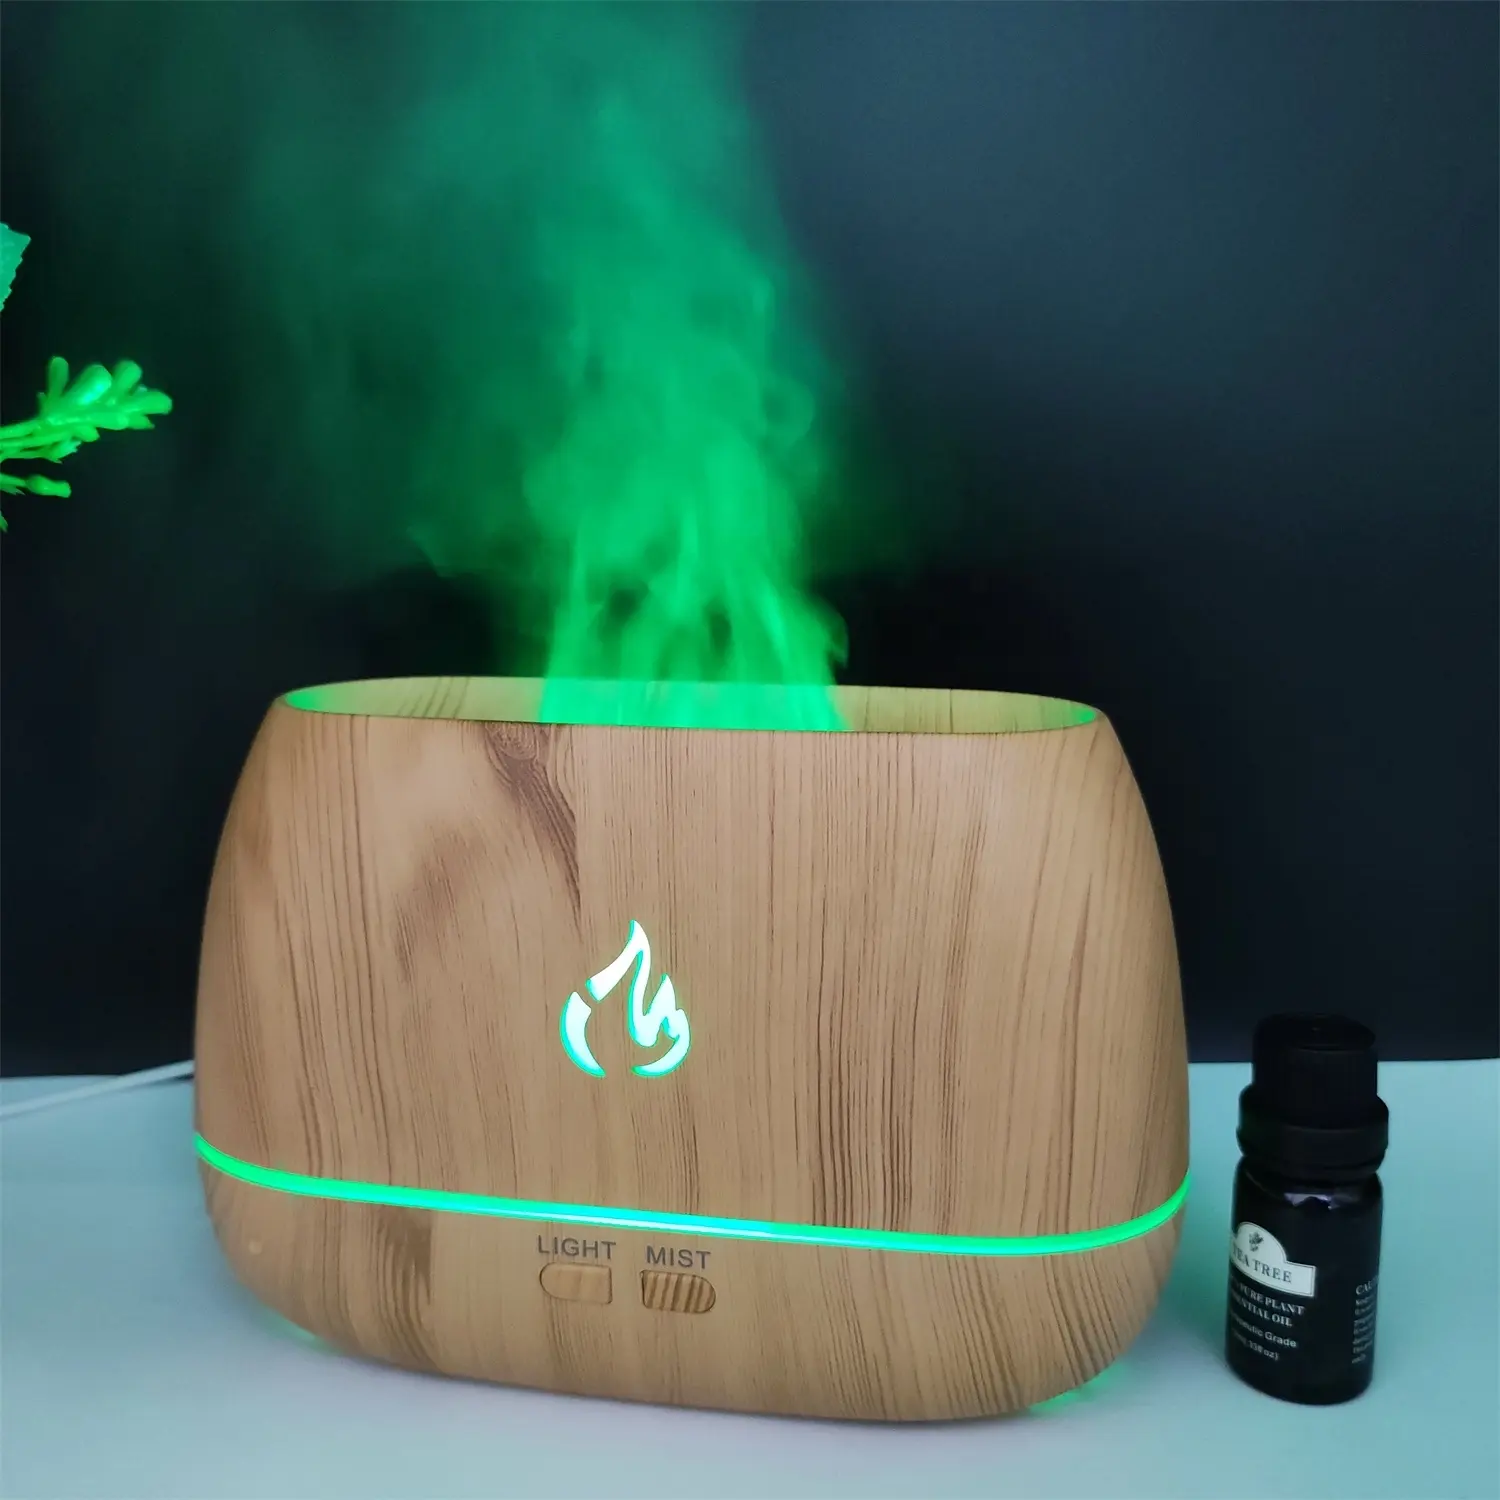 Flame Diffusor Electric Difuser 7 Colors Led Night Light 360ml Ultrasonic Aromatherapy 3D Flame Aroma Diffuser